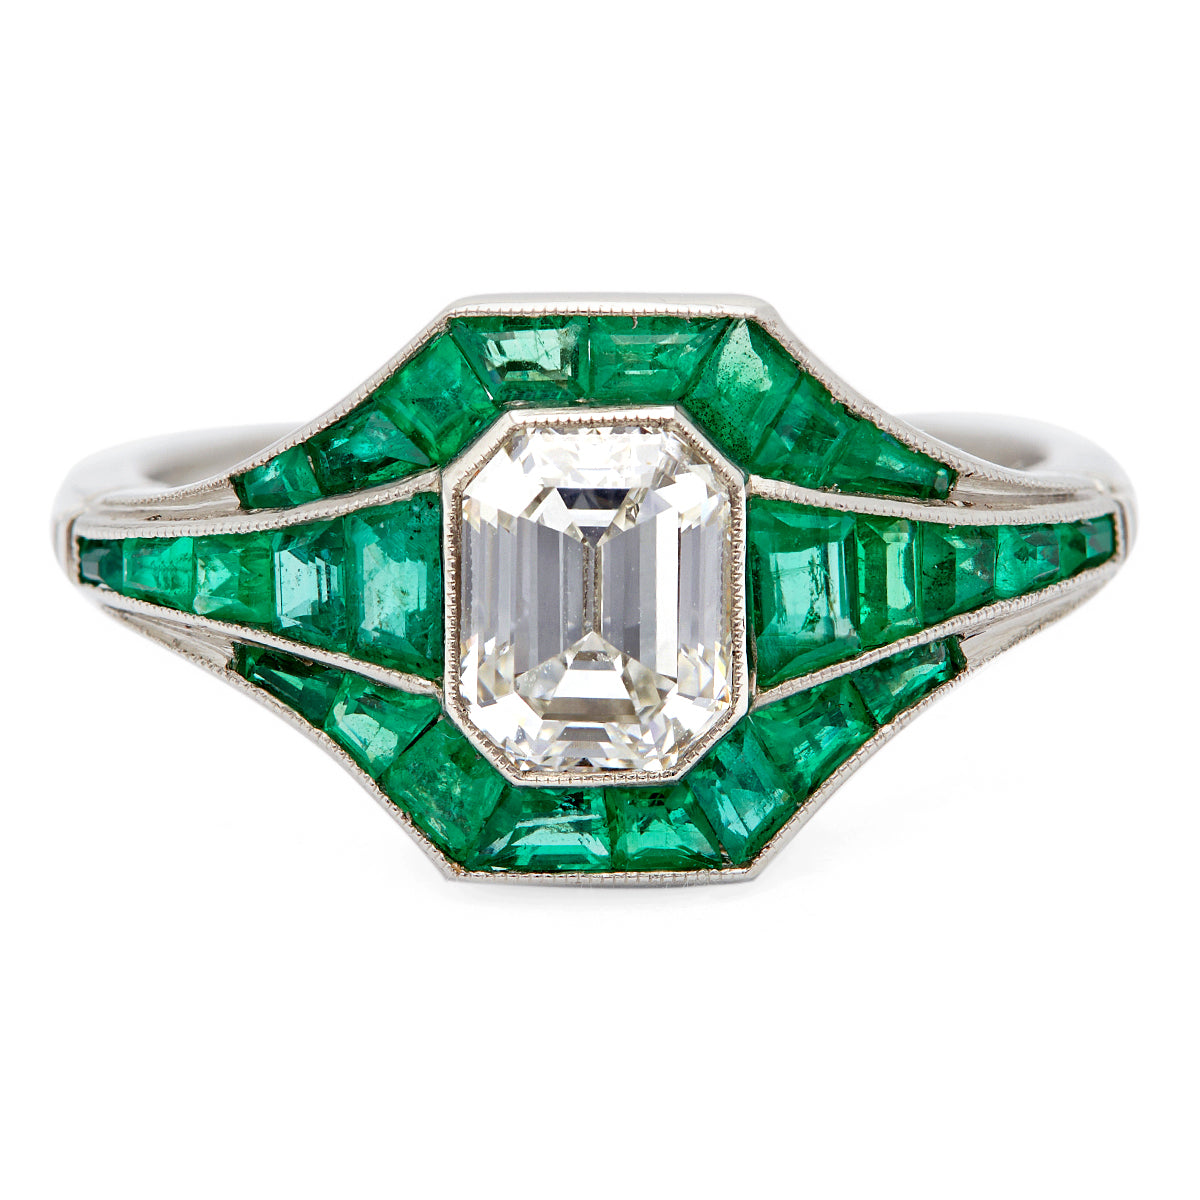 Art Deco Inspired 1.04 Carat Emerald Cut Diamond and Emerald Platinum Ring Rings Jack Weir & Sons   